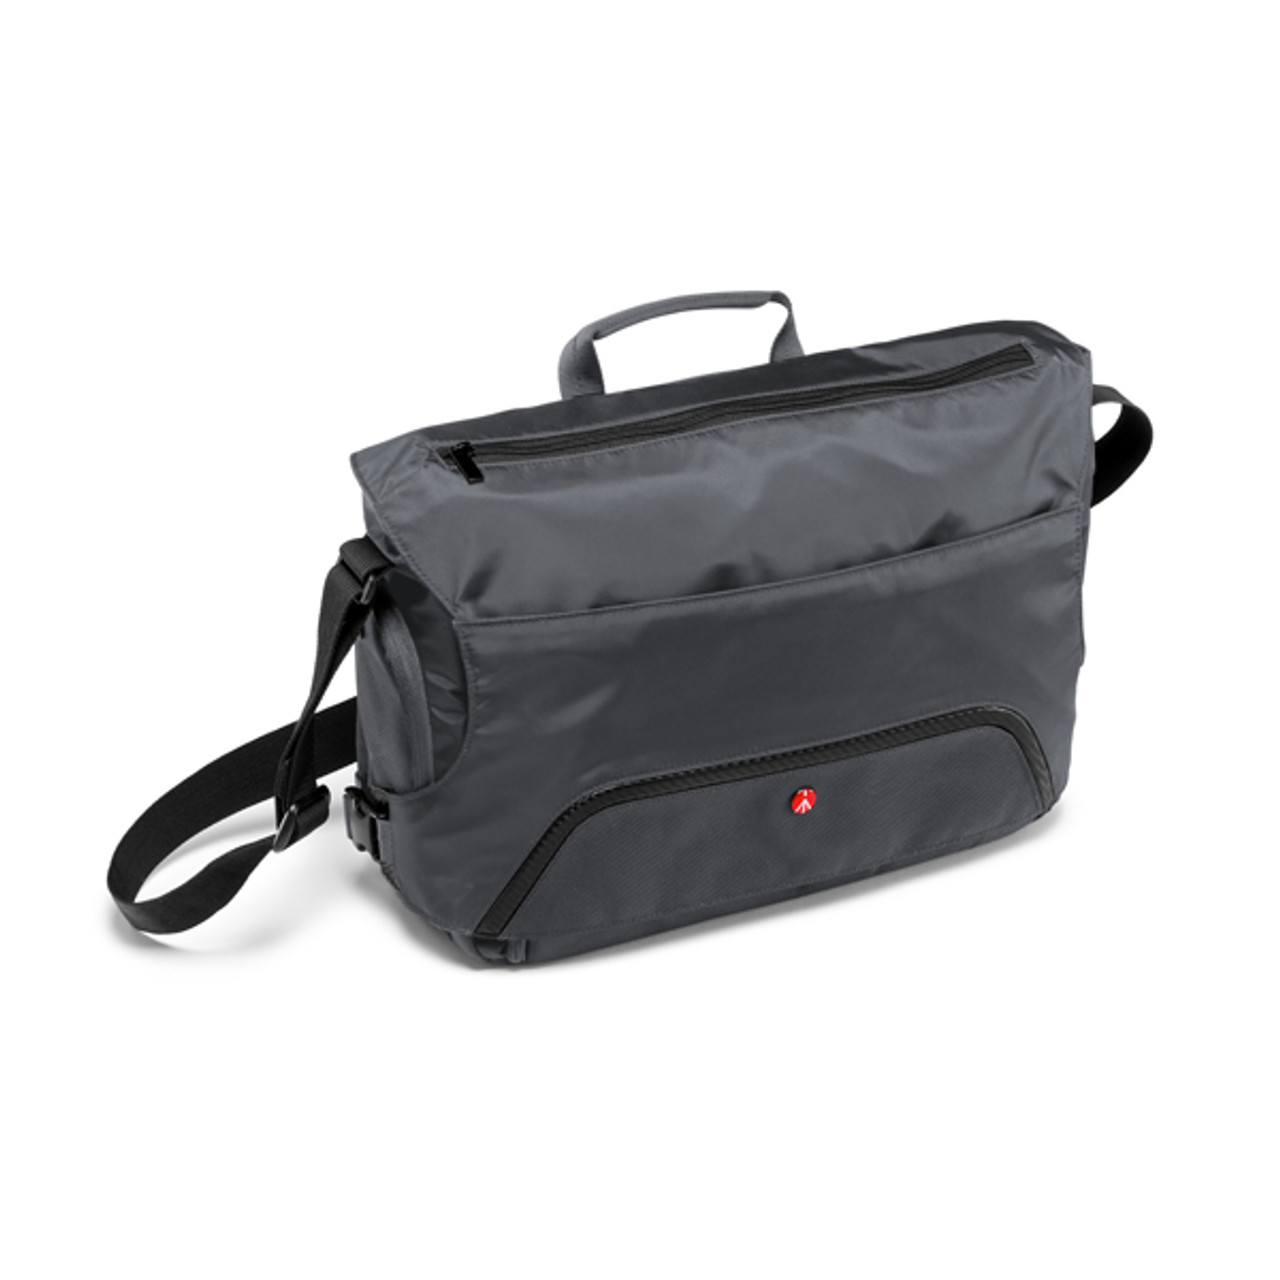 Manfrotto Befree Messenger Grey